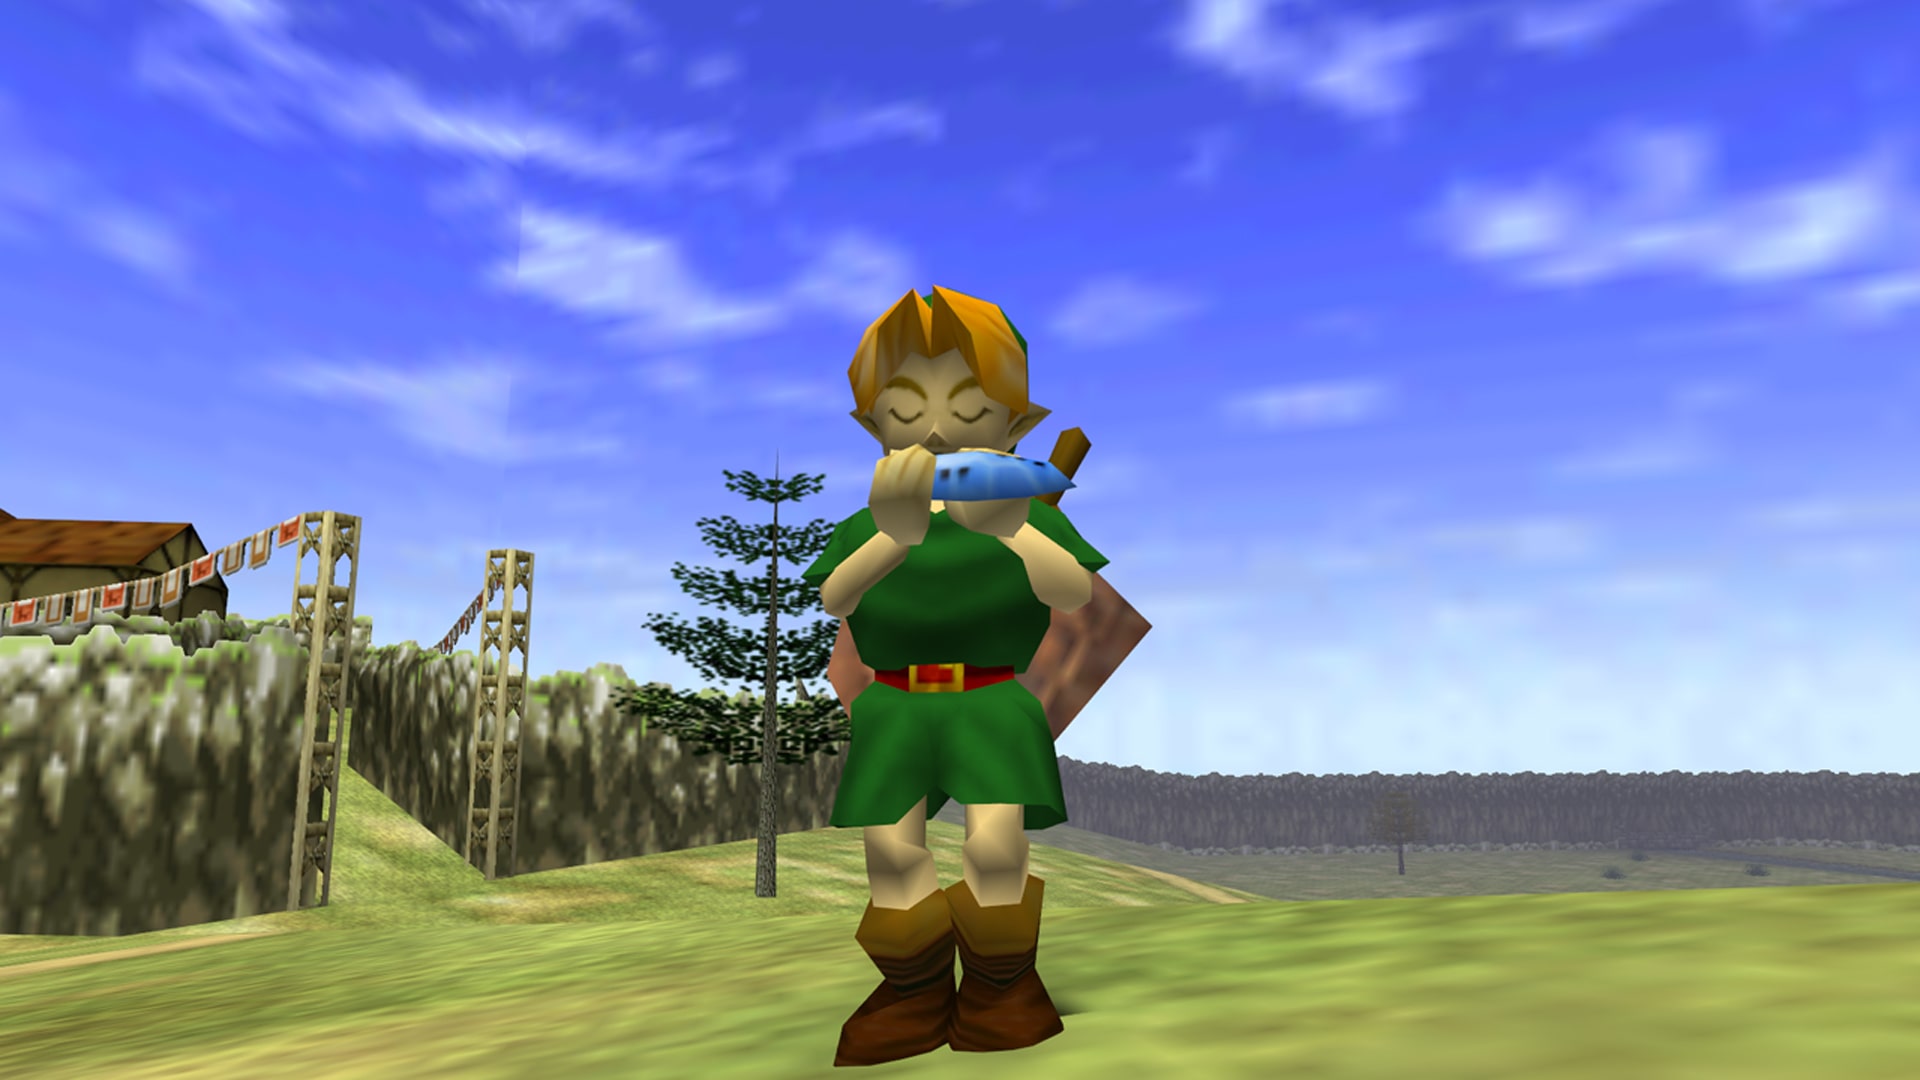 Link Playing the Ocarina in The Legend of Zelda: Ocarina of Time